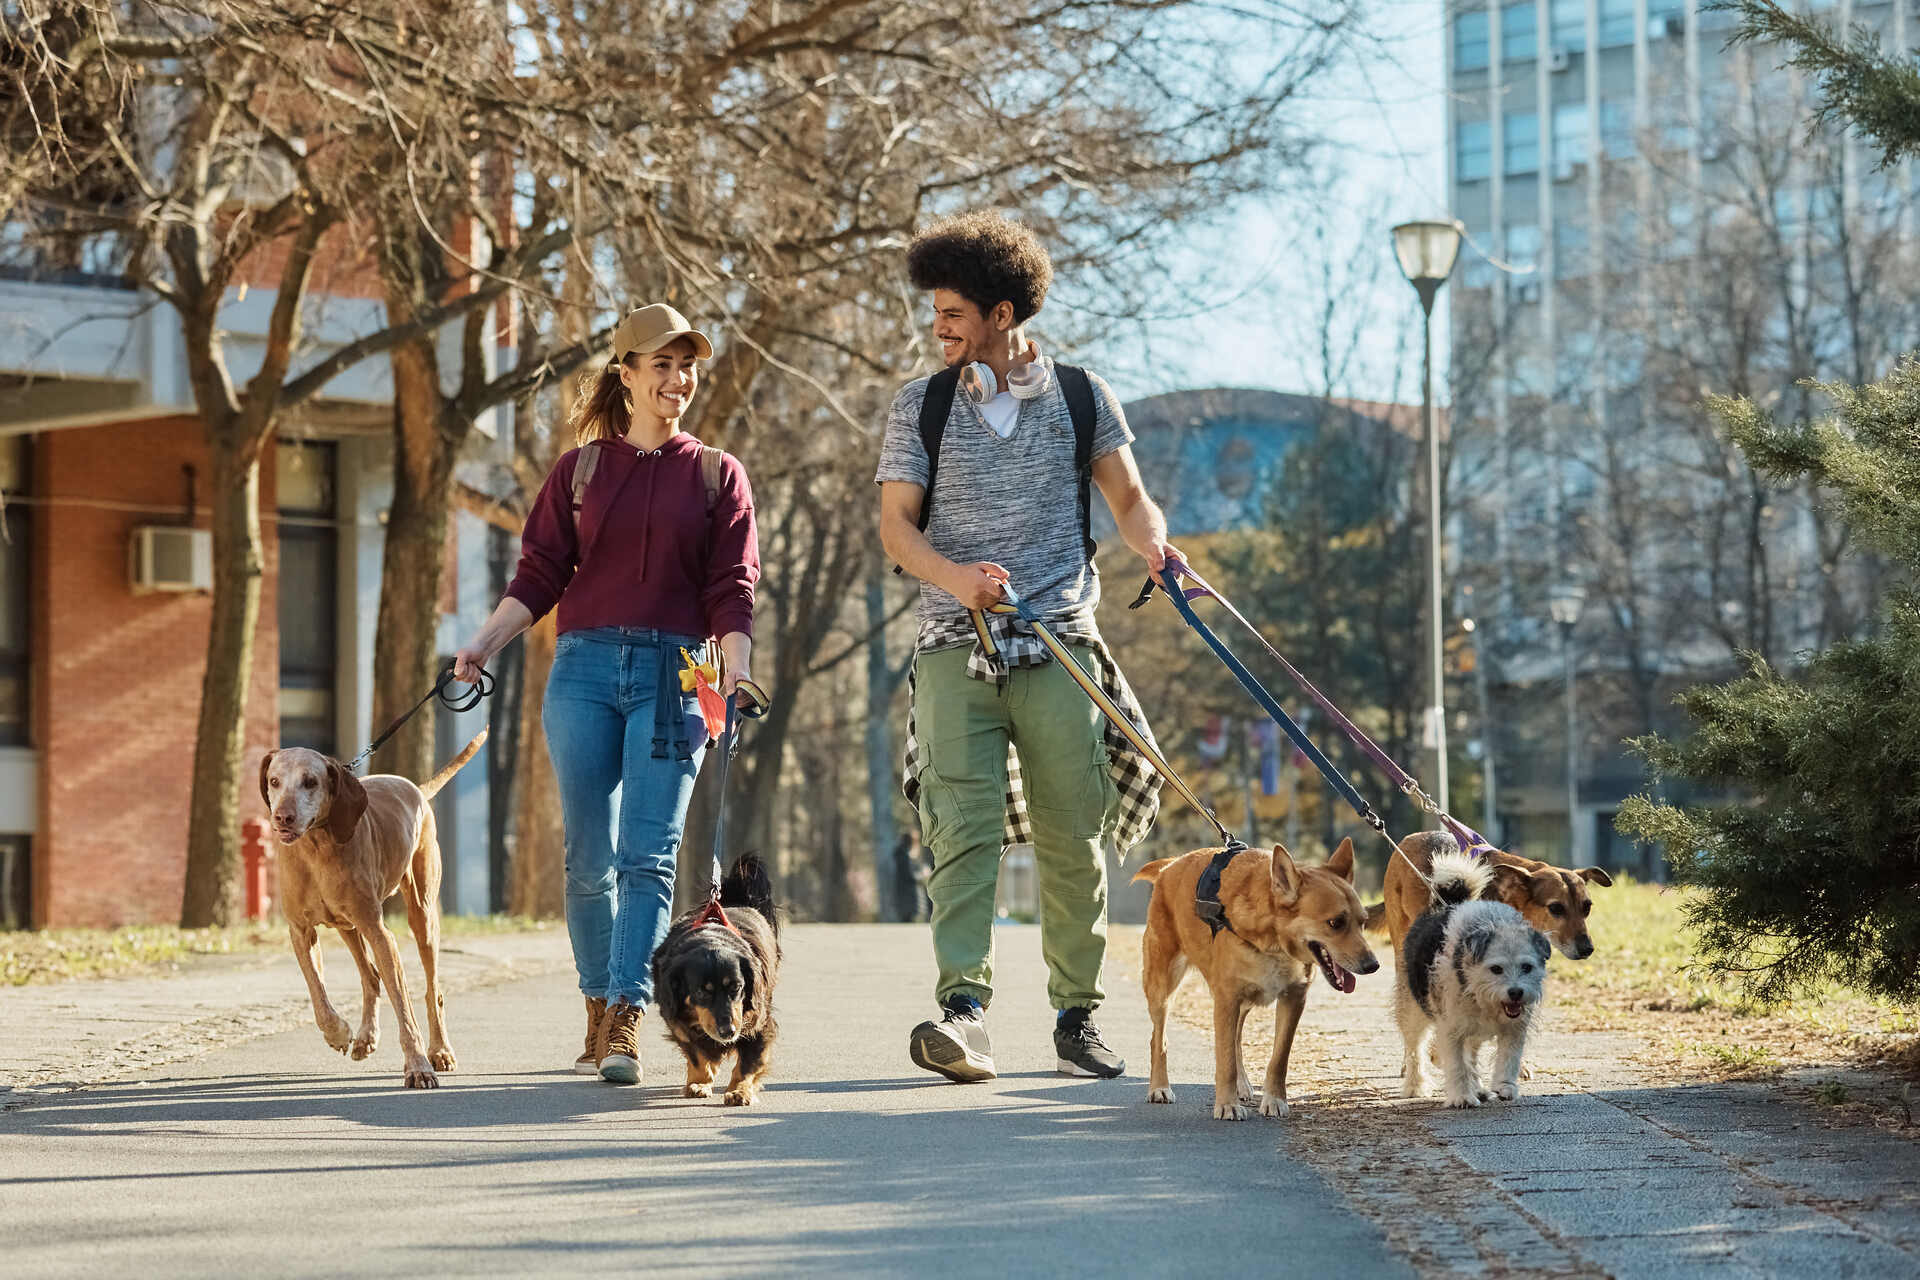 A pair of dog sitters walking multiple dogs on leash